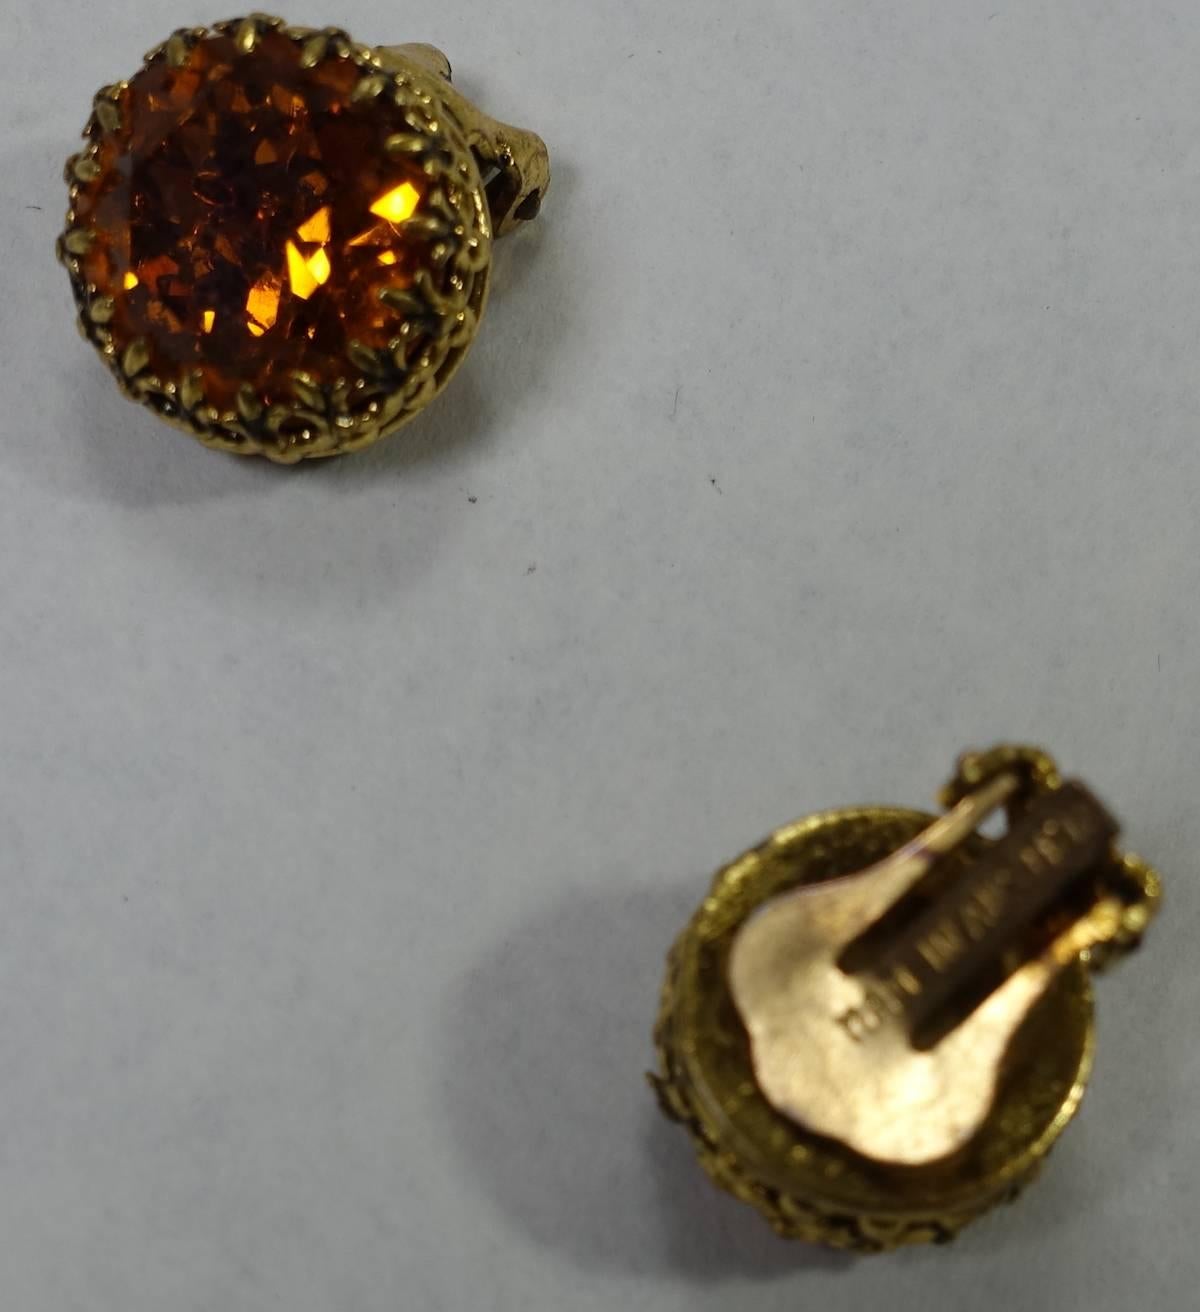 Austrian is known for their fine crystals and these earrings reflect that beauty. These vintage Austrian earrings feature topaz crystals in a gold tone setting.  These clip earrings measure 5/8” and are signed “MADE IN AUSTRIA”.  They are in